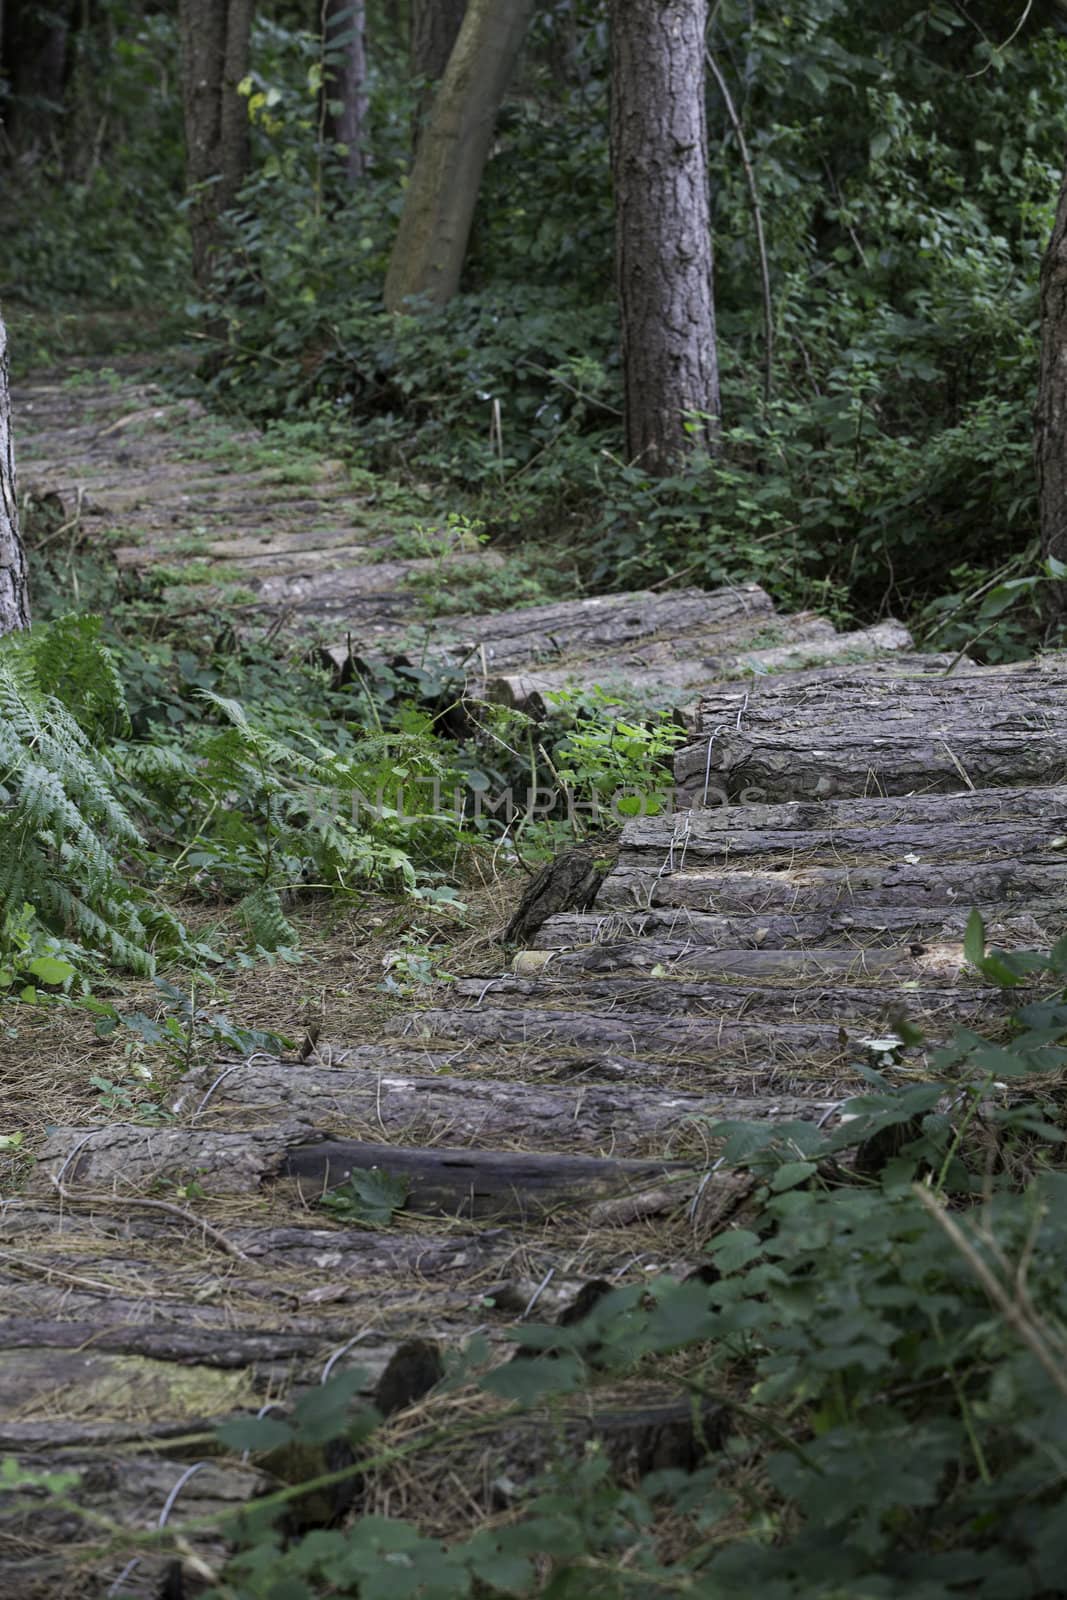 A rustic trail, created from cut logs, to form a natural path through the forest